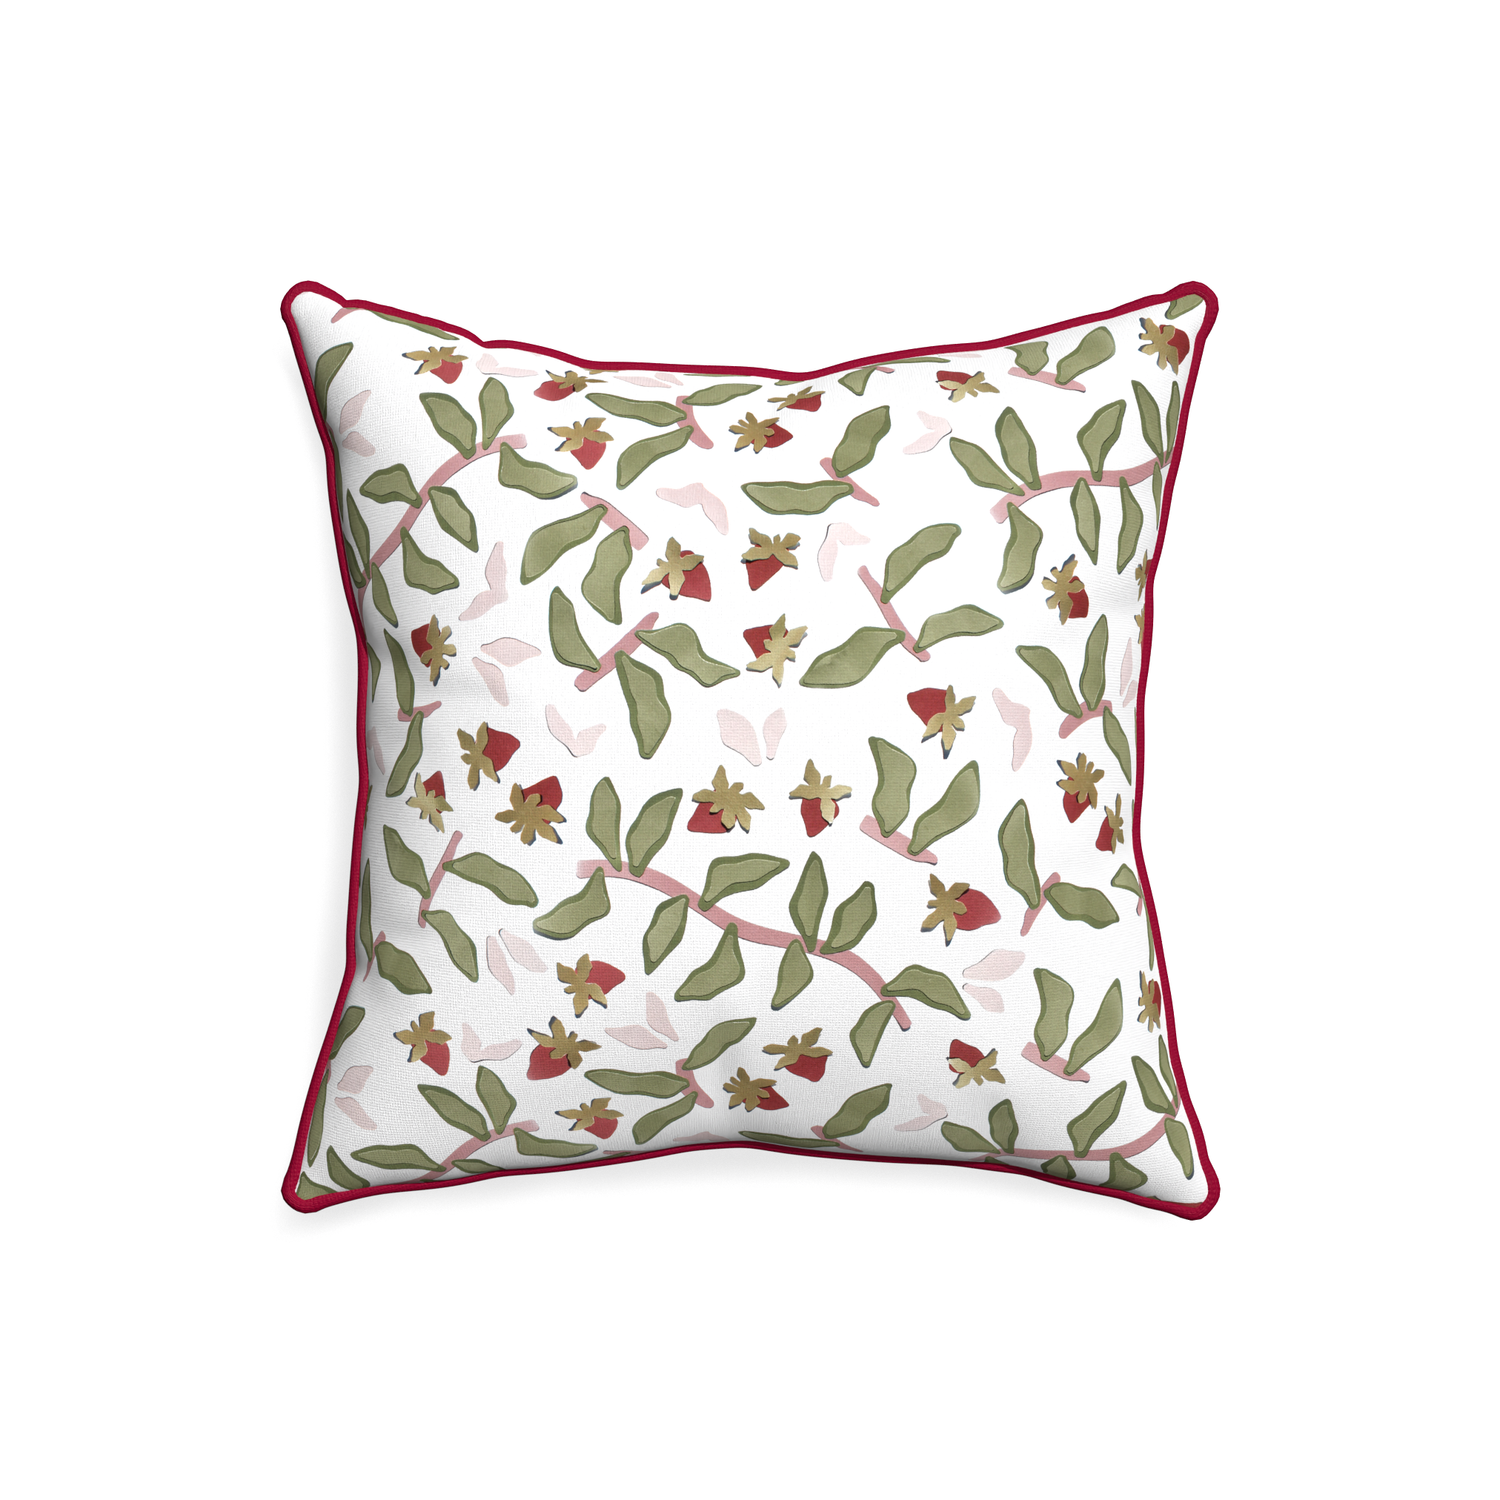 20-square nellie custom strawberry & botanicalpillow with raspberry piping on white background